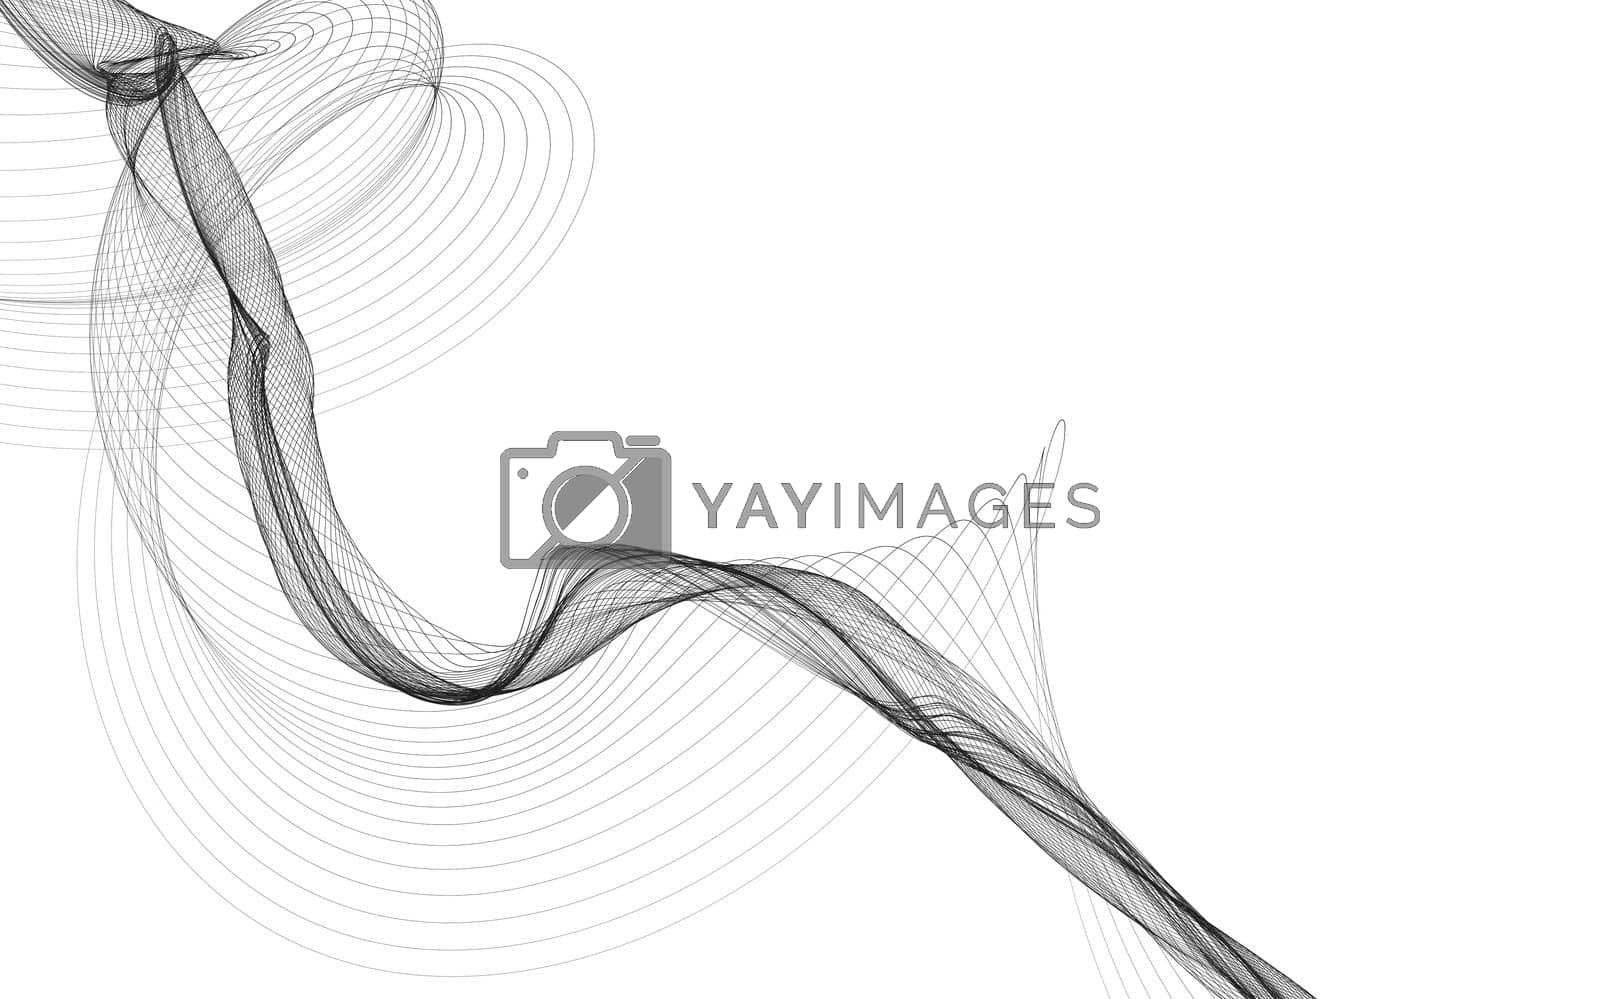 Royalty free image of Abstract background with monochrome wave lines on white background.  by teerawit